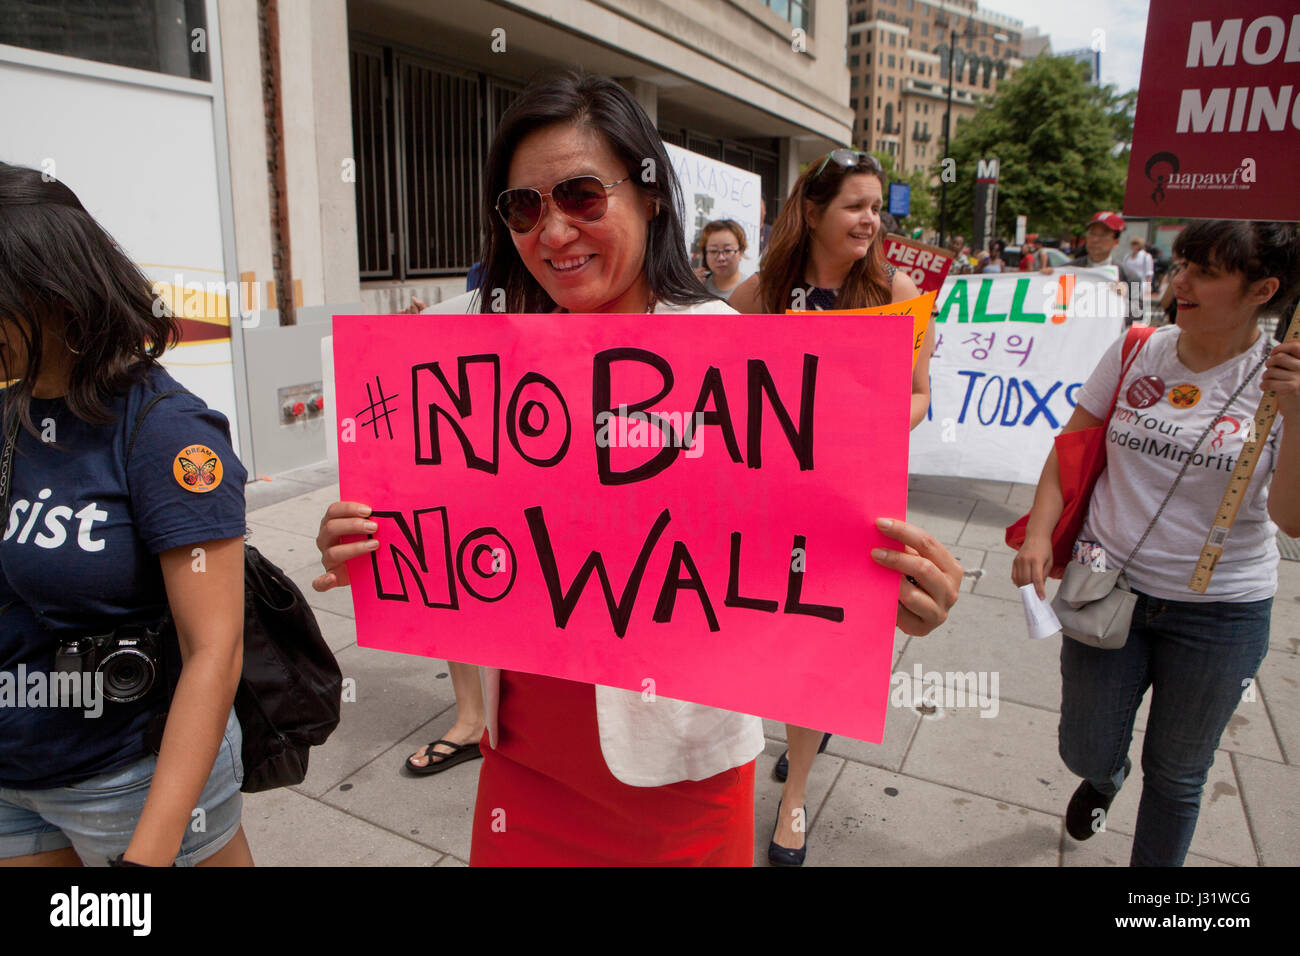 Washington, DC, USA. 1st May, 2017. A large number of immigrants and supporters, led by CASA in Action, rallied and marched to the White House for immigrants' rights, on this International Workers Day. Credit: B Christopher/Alamy Live News Stock Photo